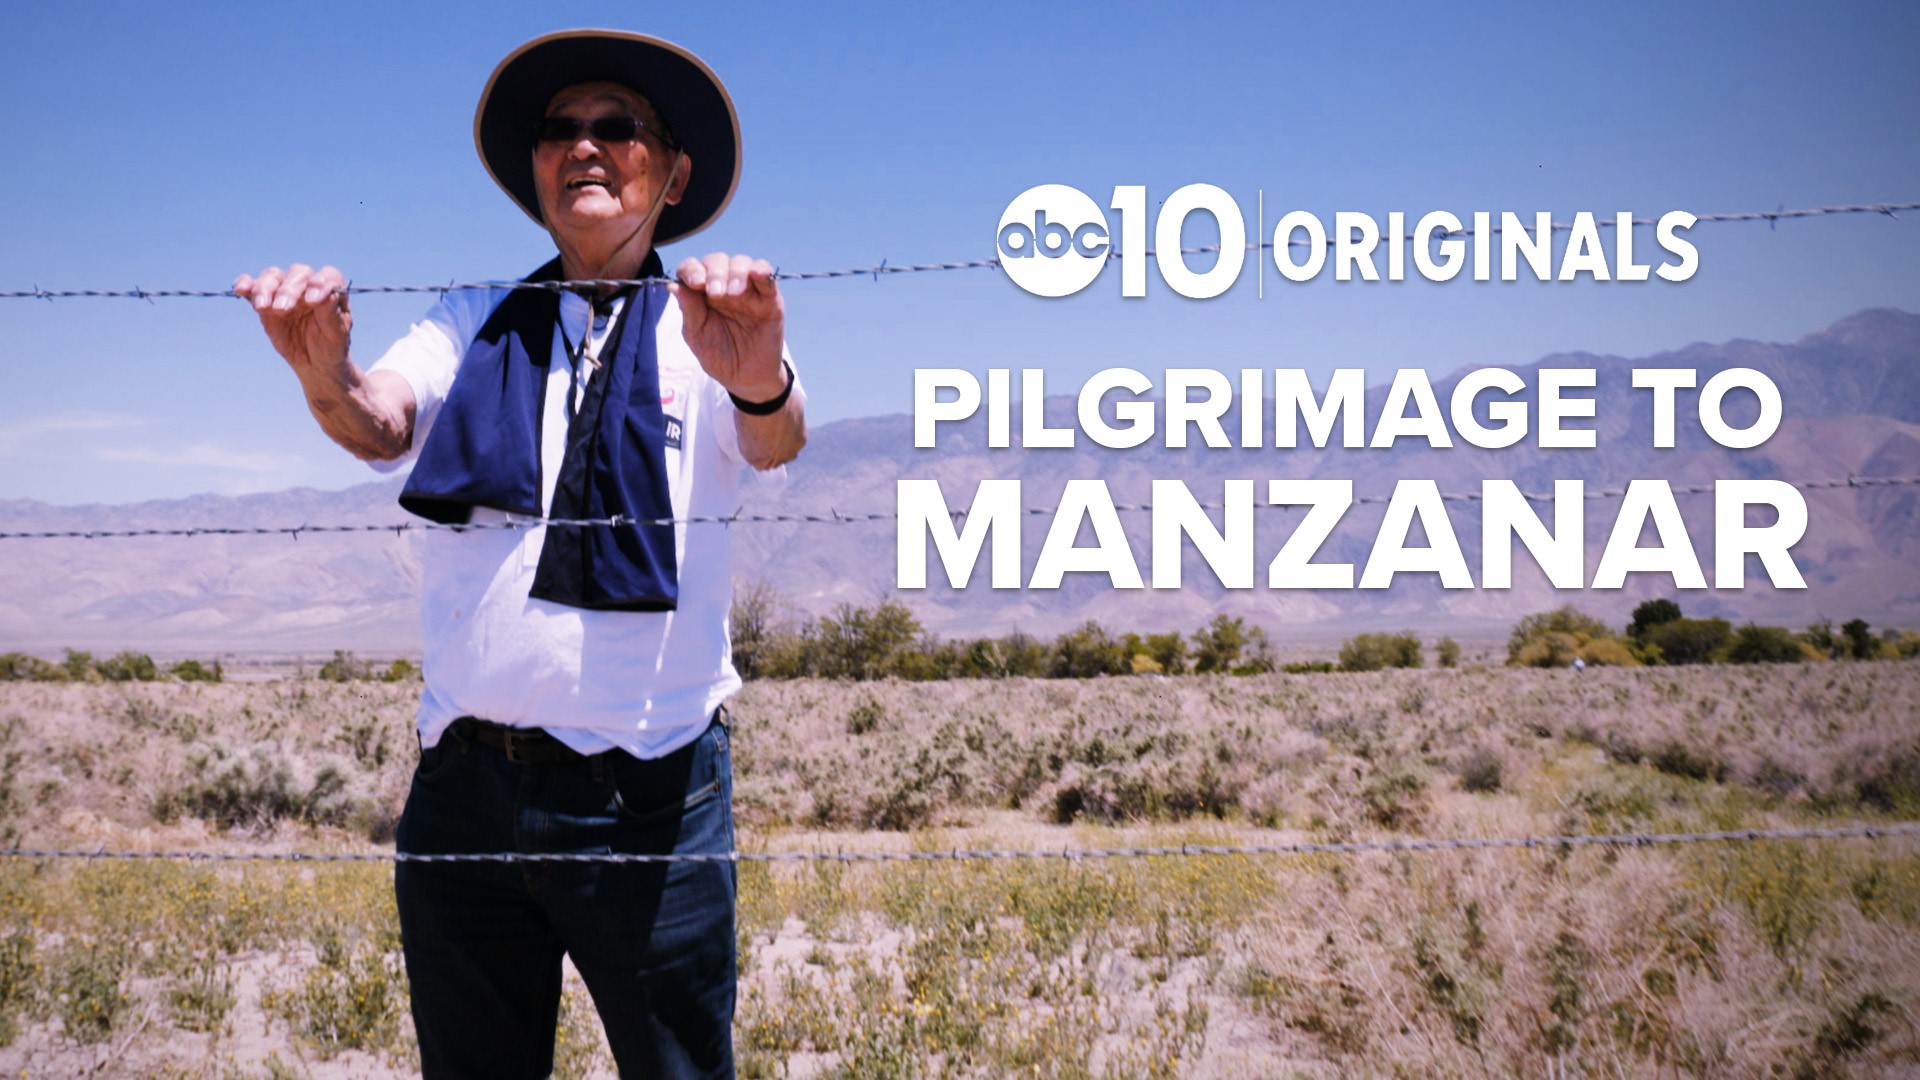 Survivors make a pilgrimage to Manzanar, site of one of 10 camps where the U.S. government incarcerated Japanese immigrants and their families during World War 2.